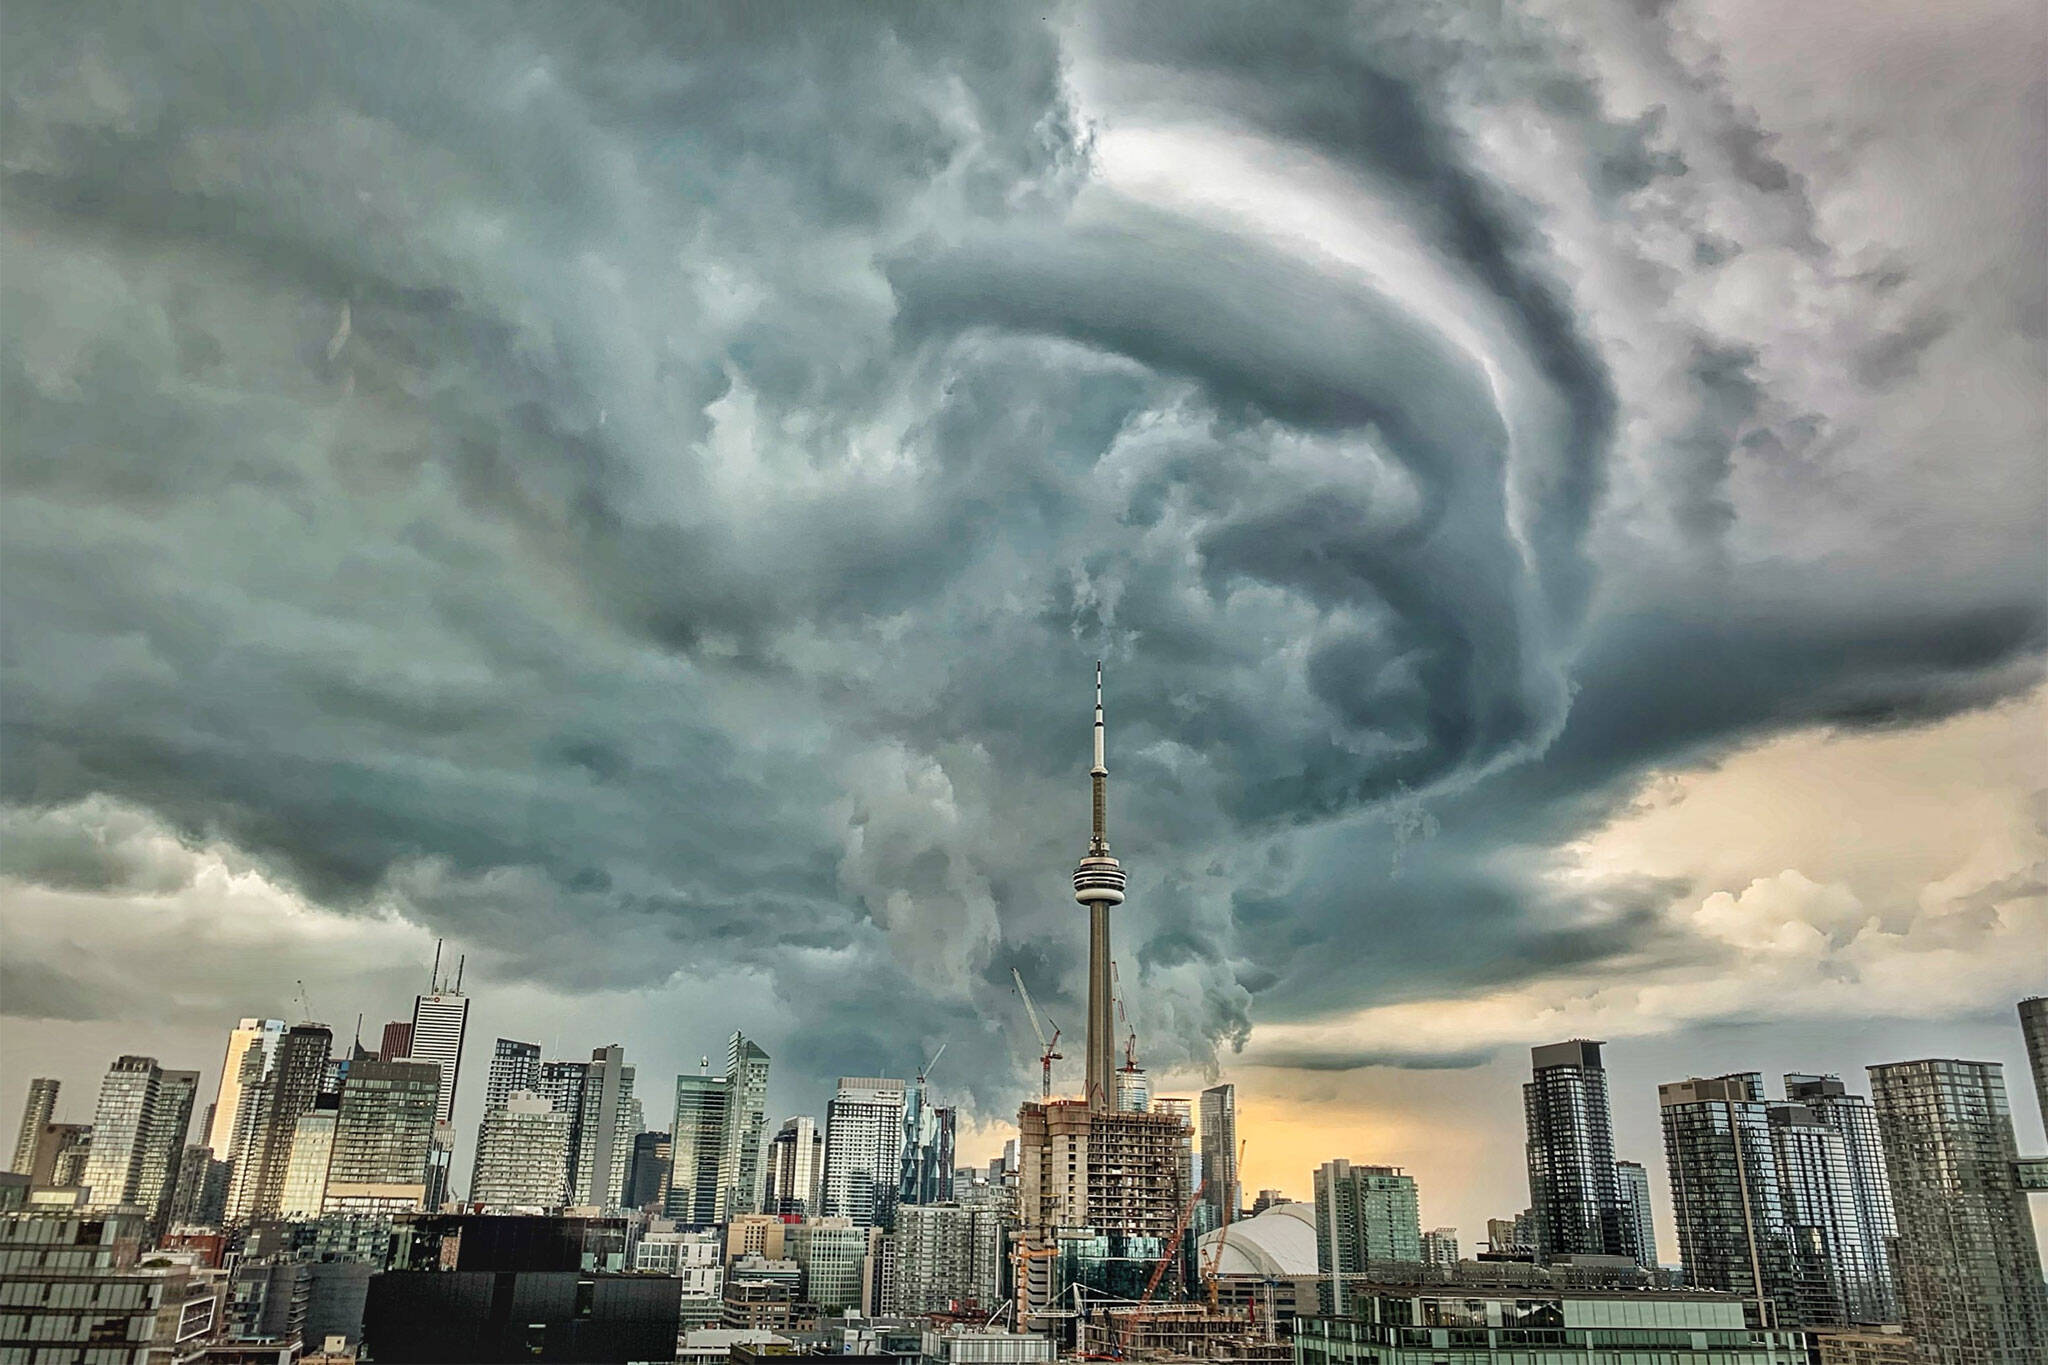 Toronto is now under a severe thunderstorm warning